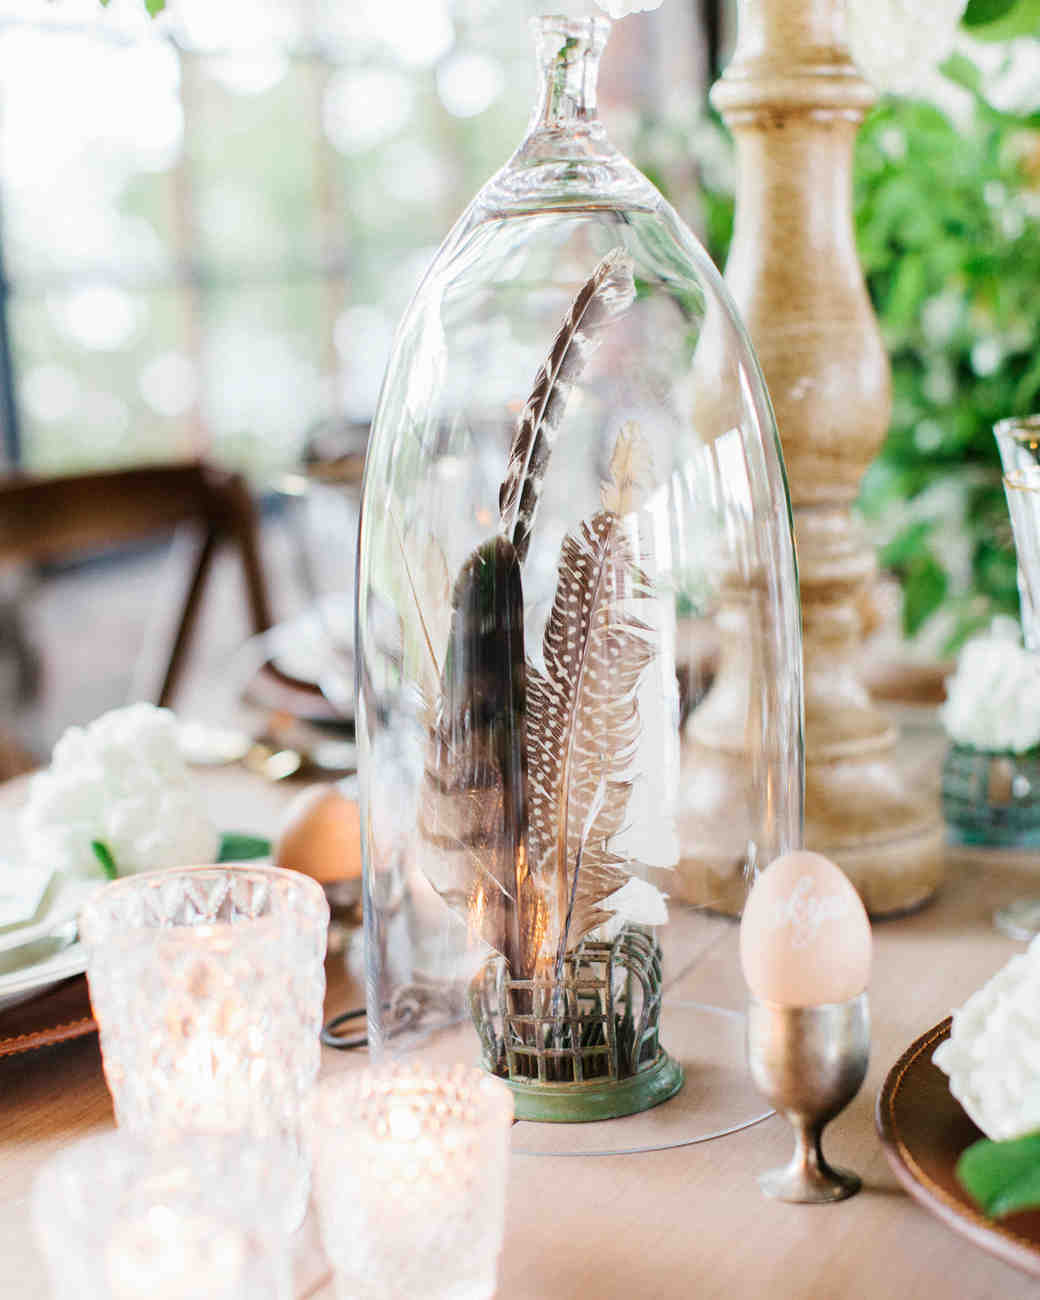 Wedding Centerpieces Without Flowers Beloved Blog